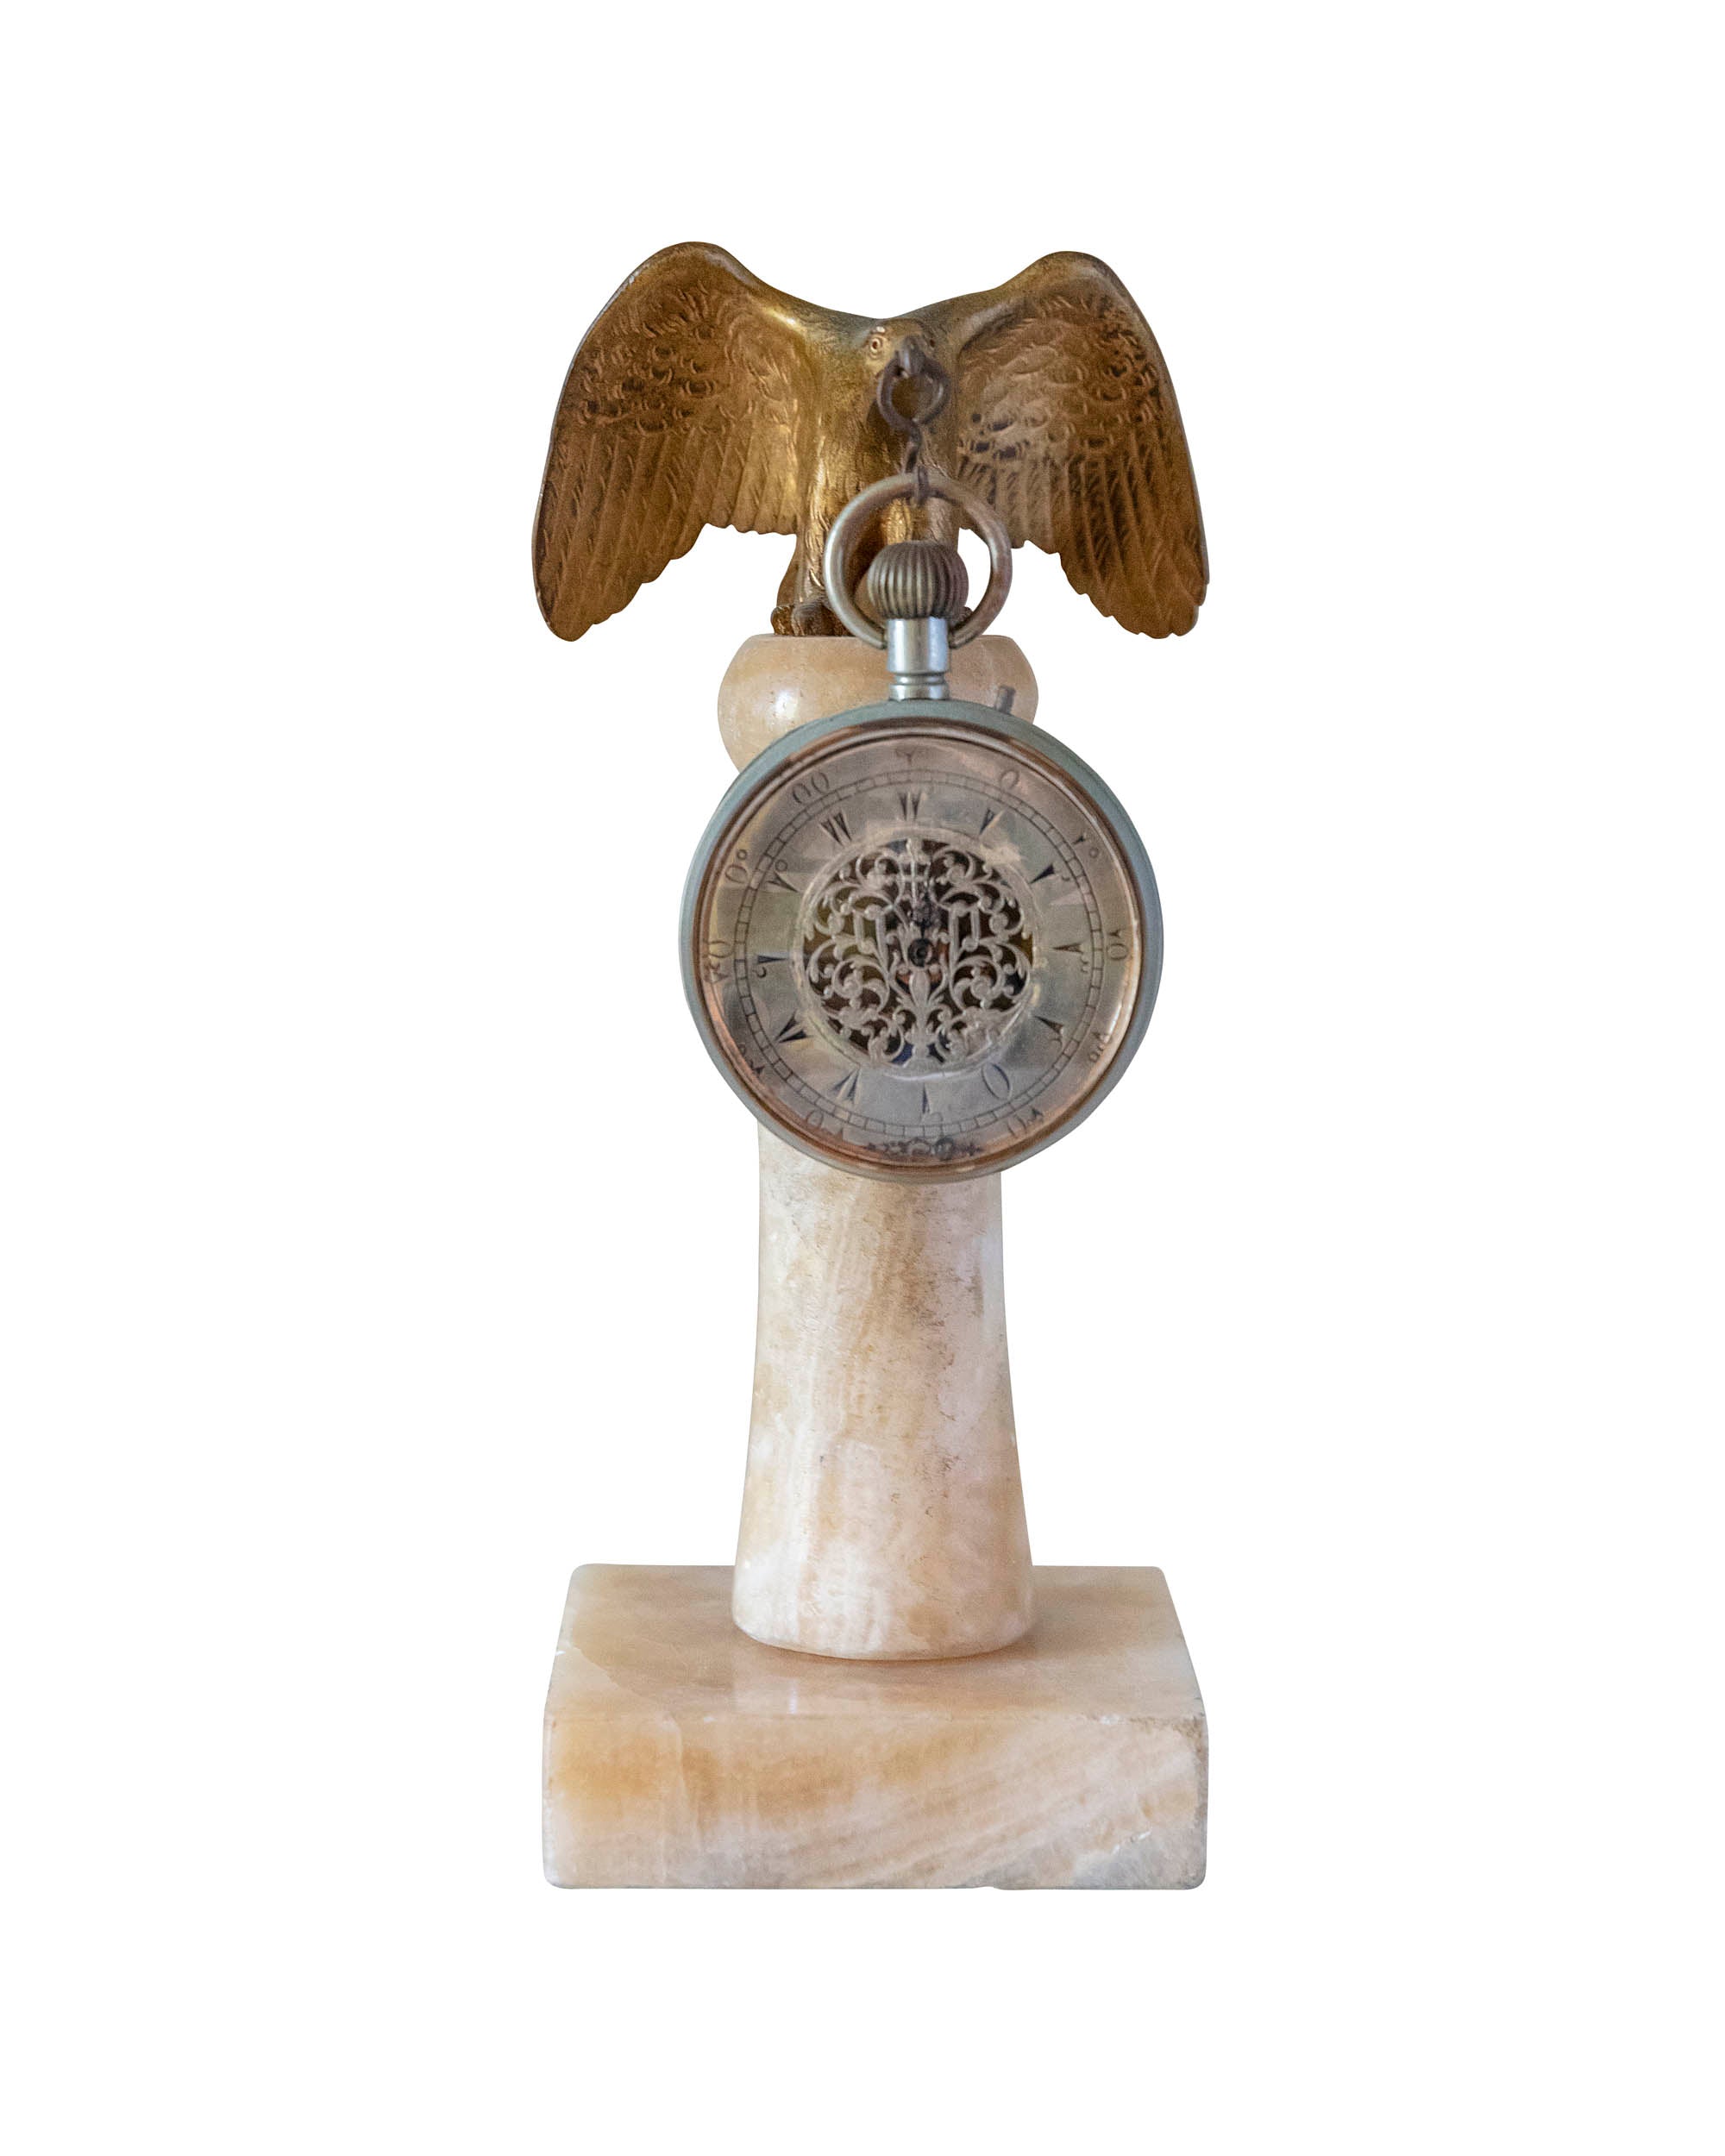 Turkish clock supported by a bronze eagle on a white marble plinth